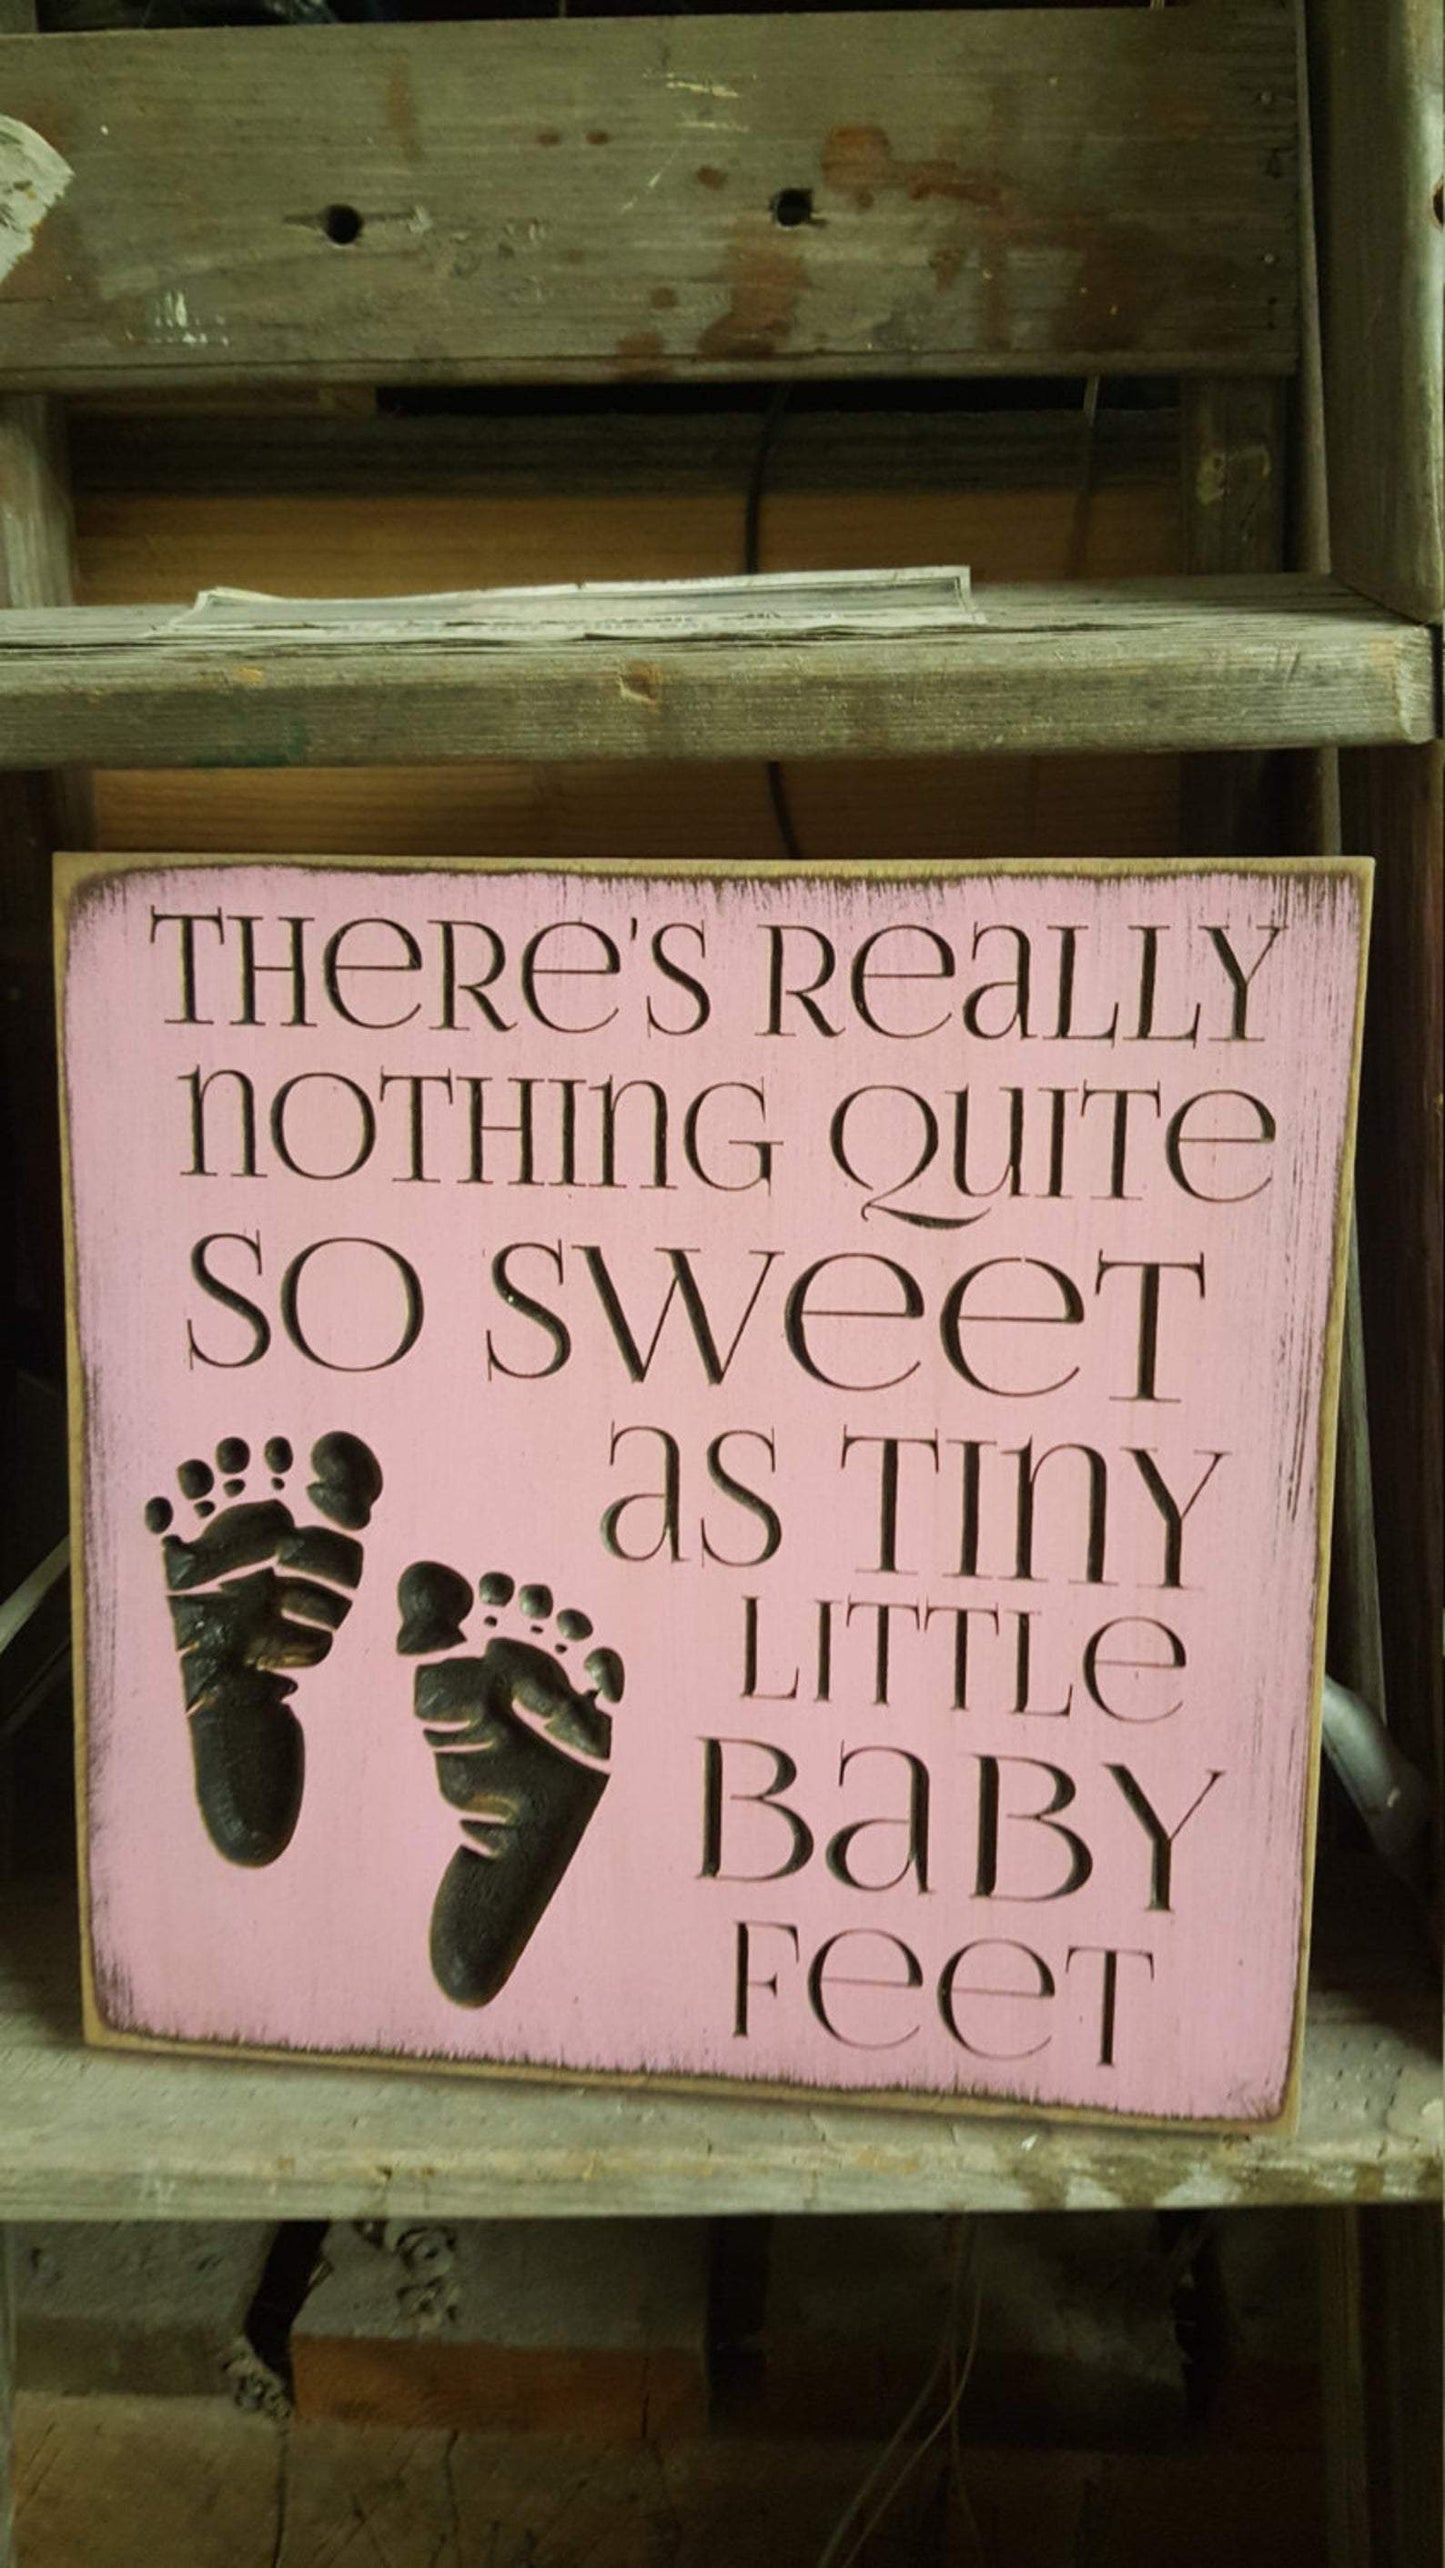 There's Really Nothing Quite So Sweet, As Tiny Little Baby Feet - Wooden Sign